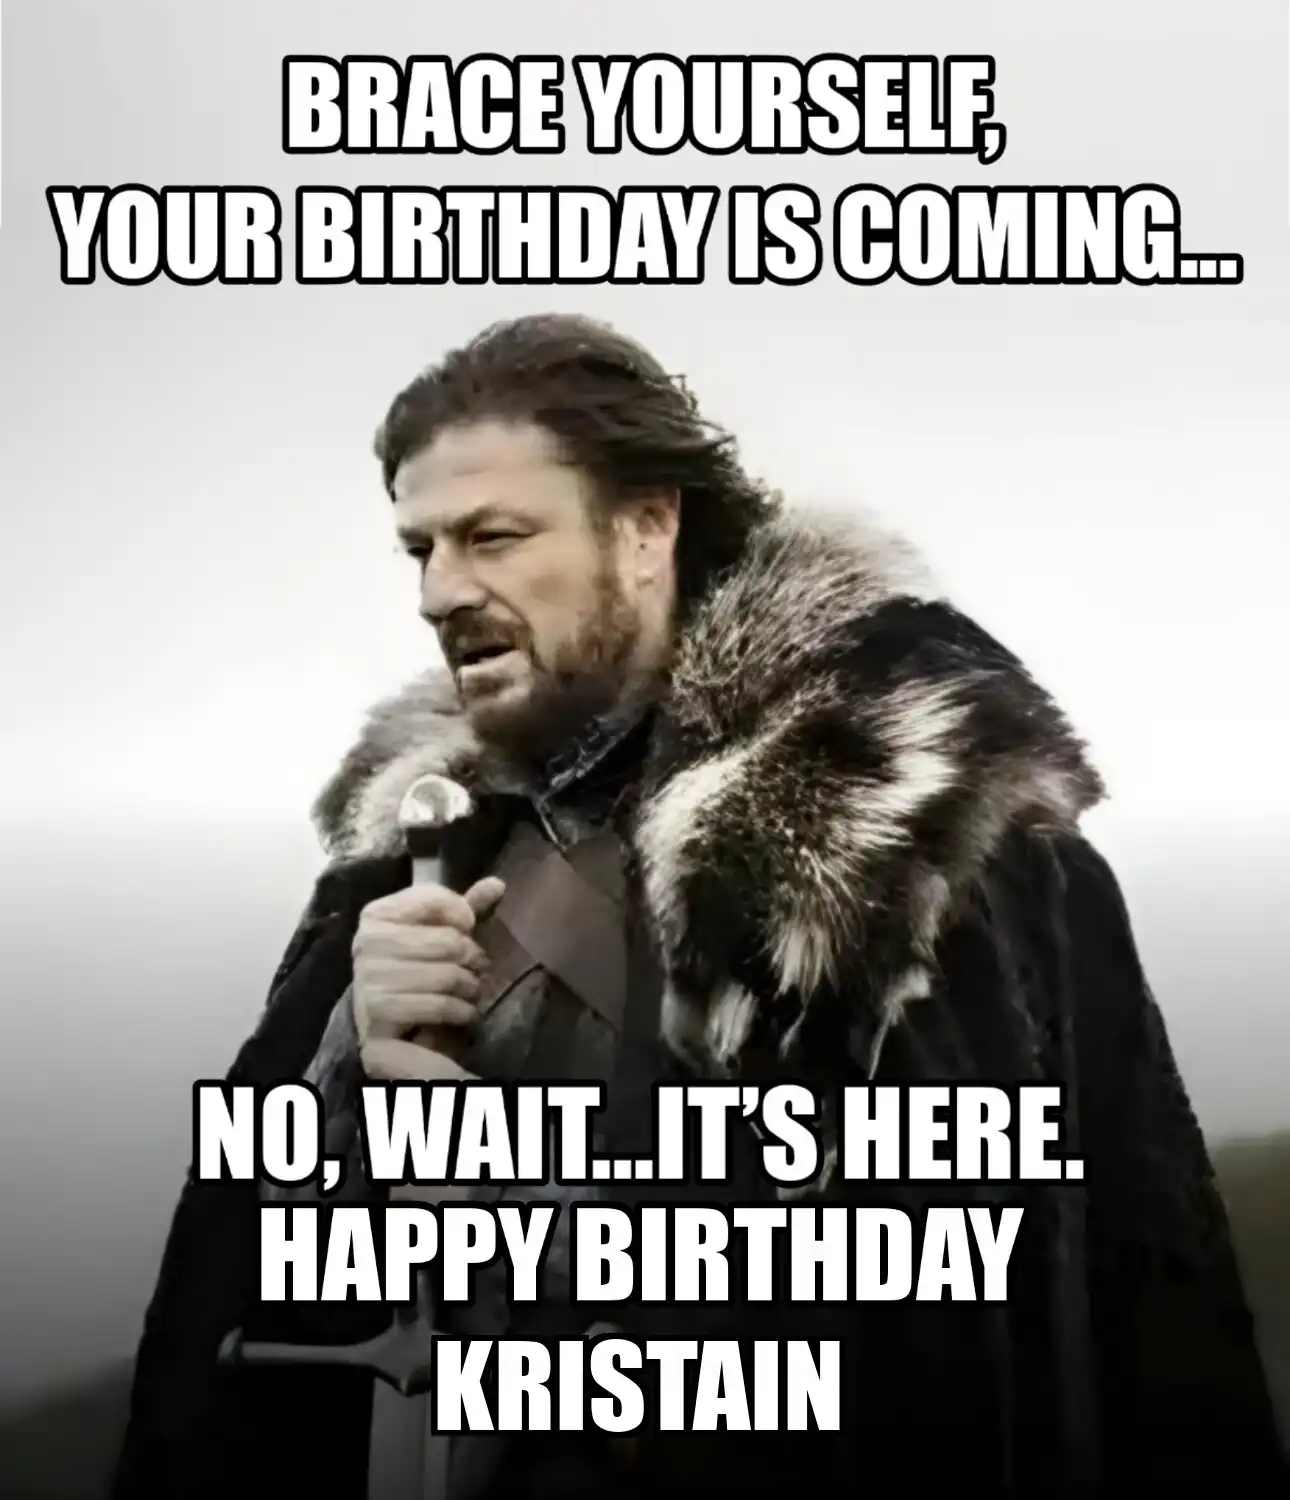 Happy Birthday Kristain Brace Yourself Your Birthday Is Coming Meme